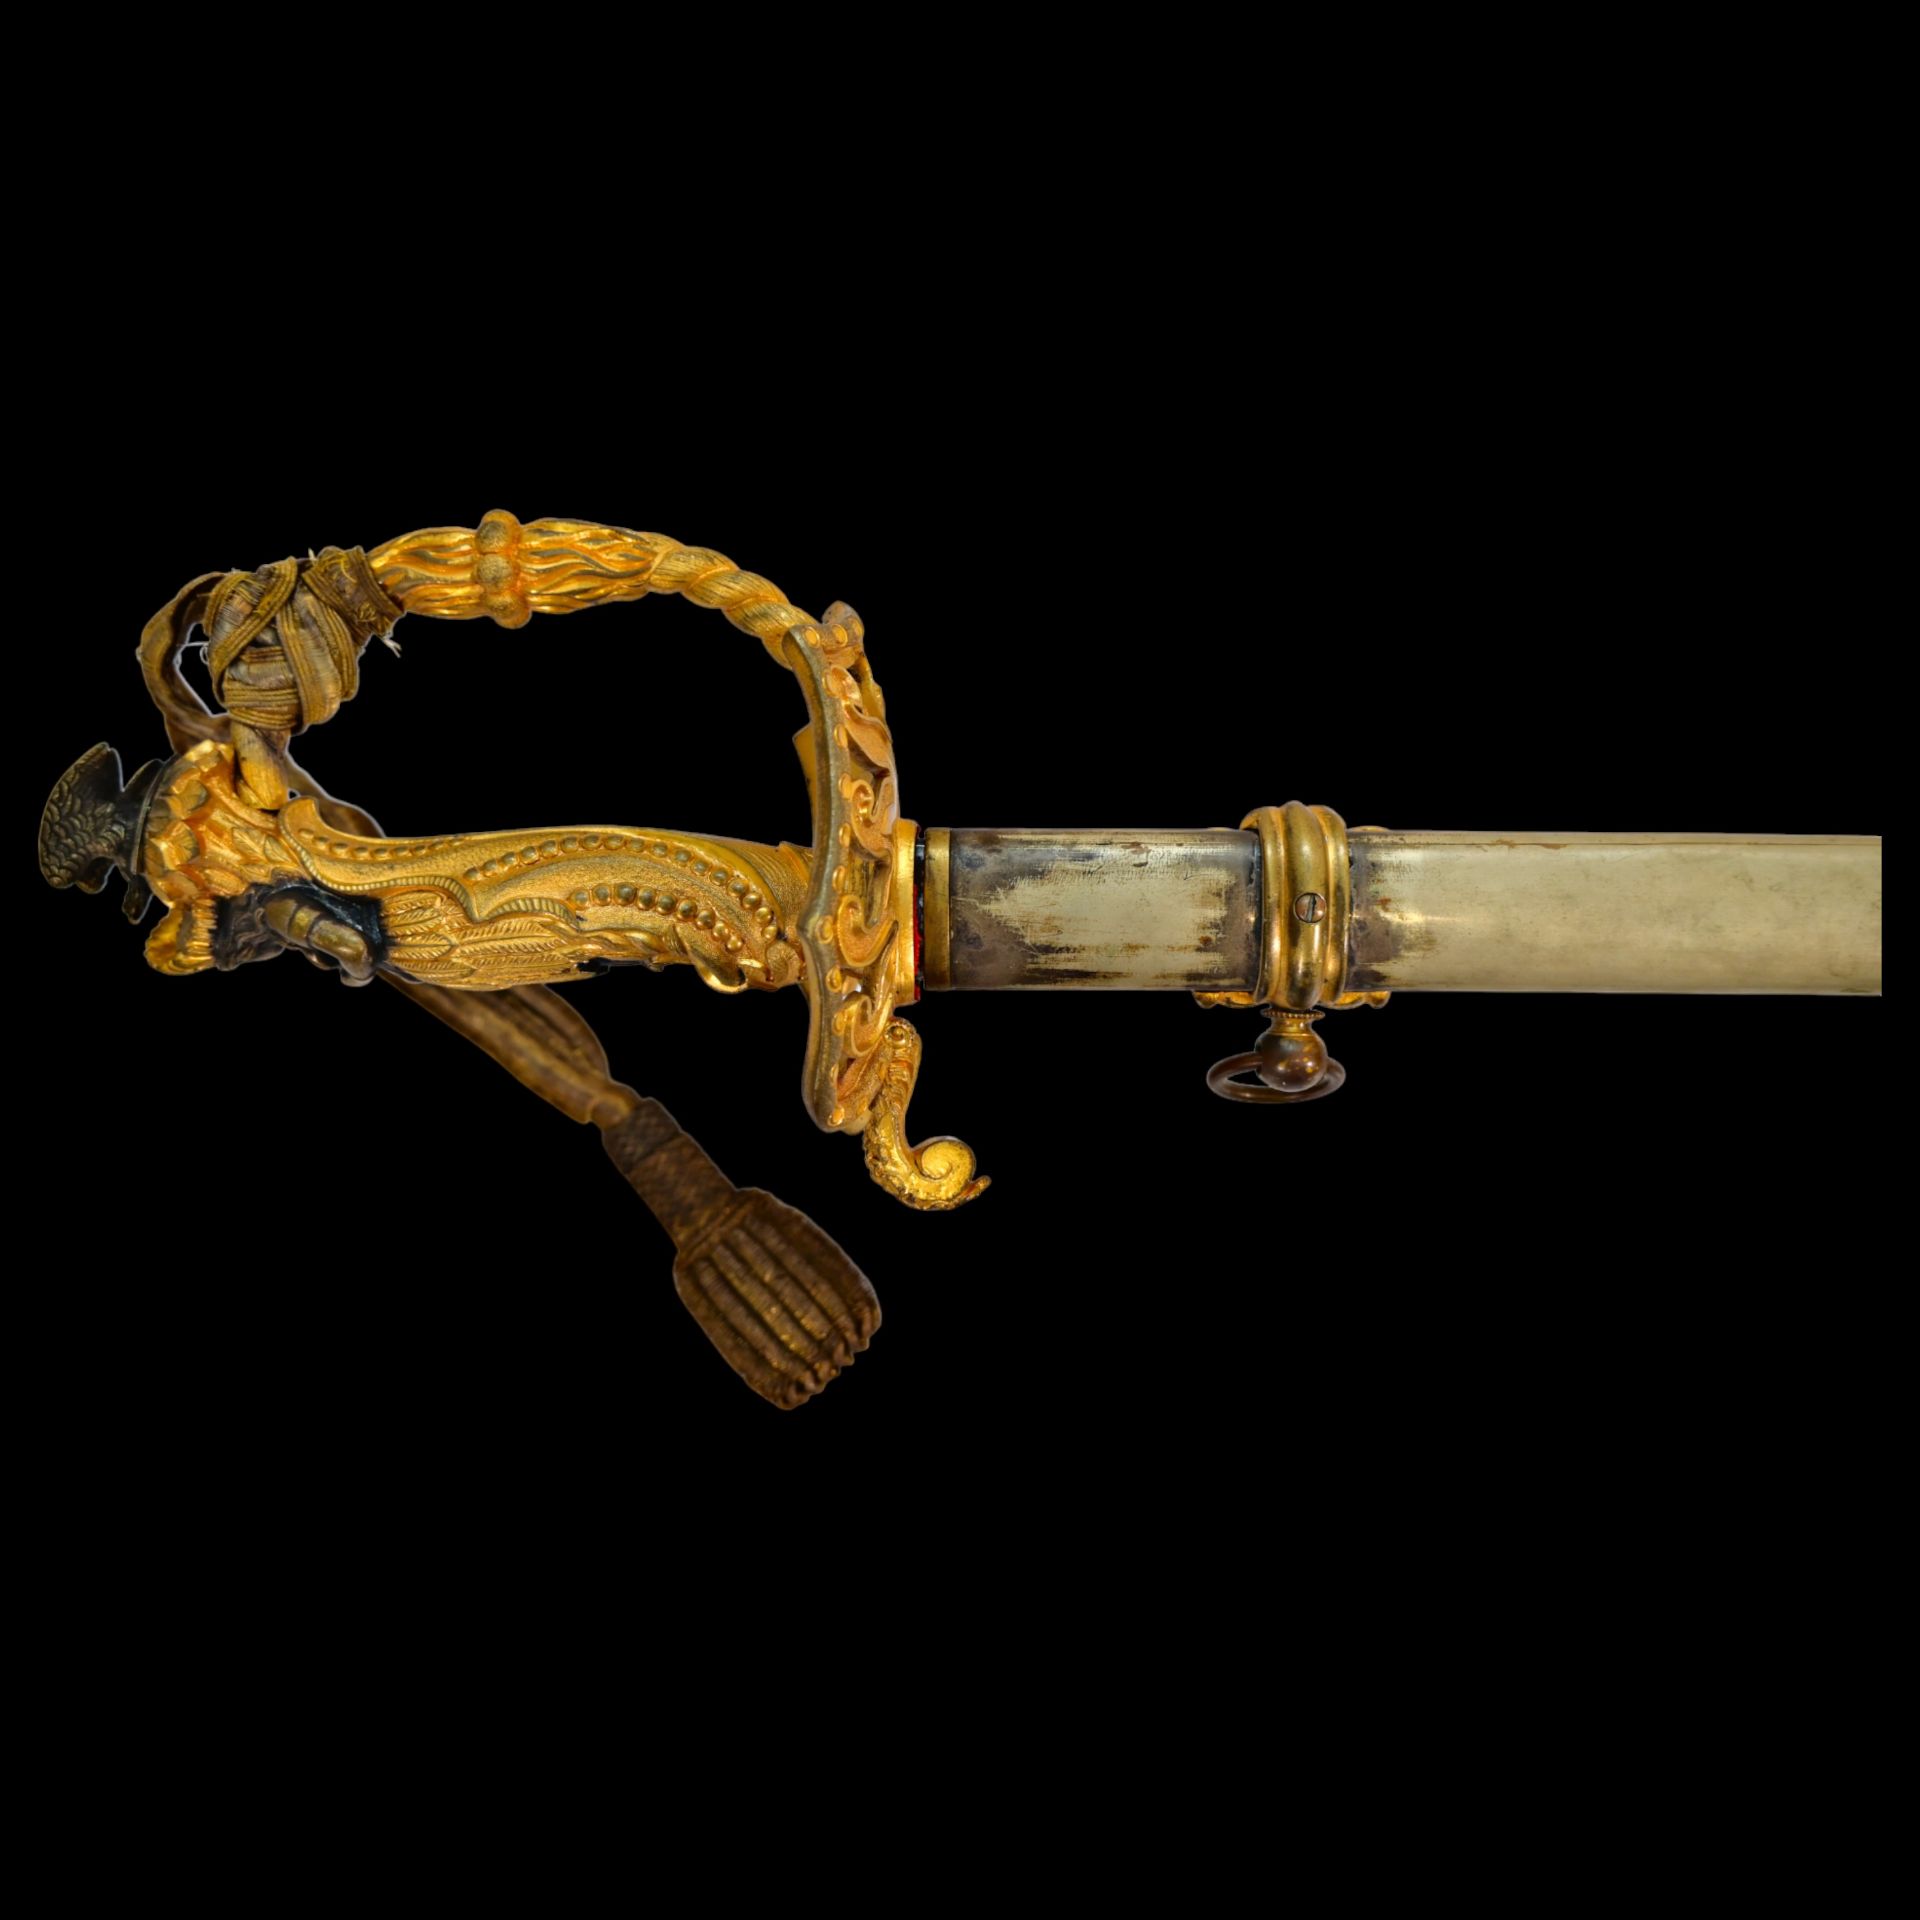 Magnificent "Schuyler Hartley & Graham" Indian Maiden Sword with Civil War Related Presentation. - Image 7 of 20